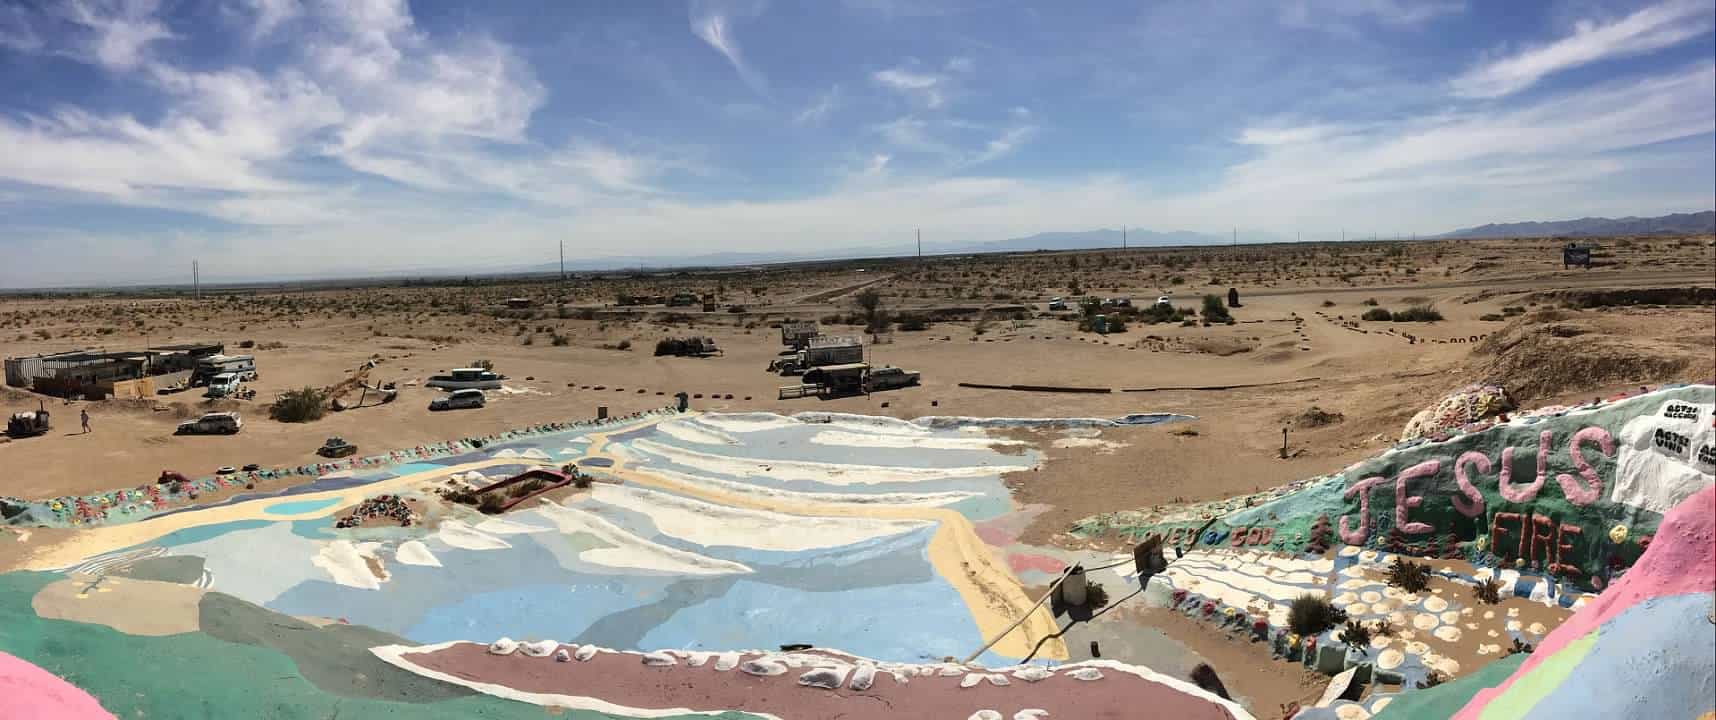 View from the top of the main peak at Salvation mountain. Can see a large expanse of the surrounding desert